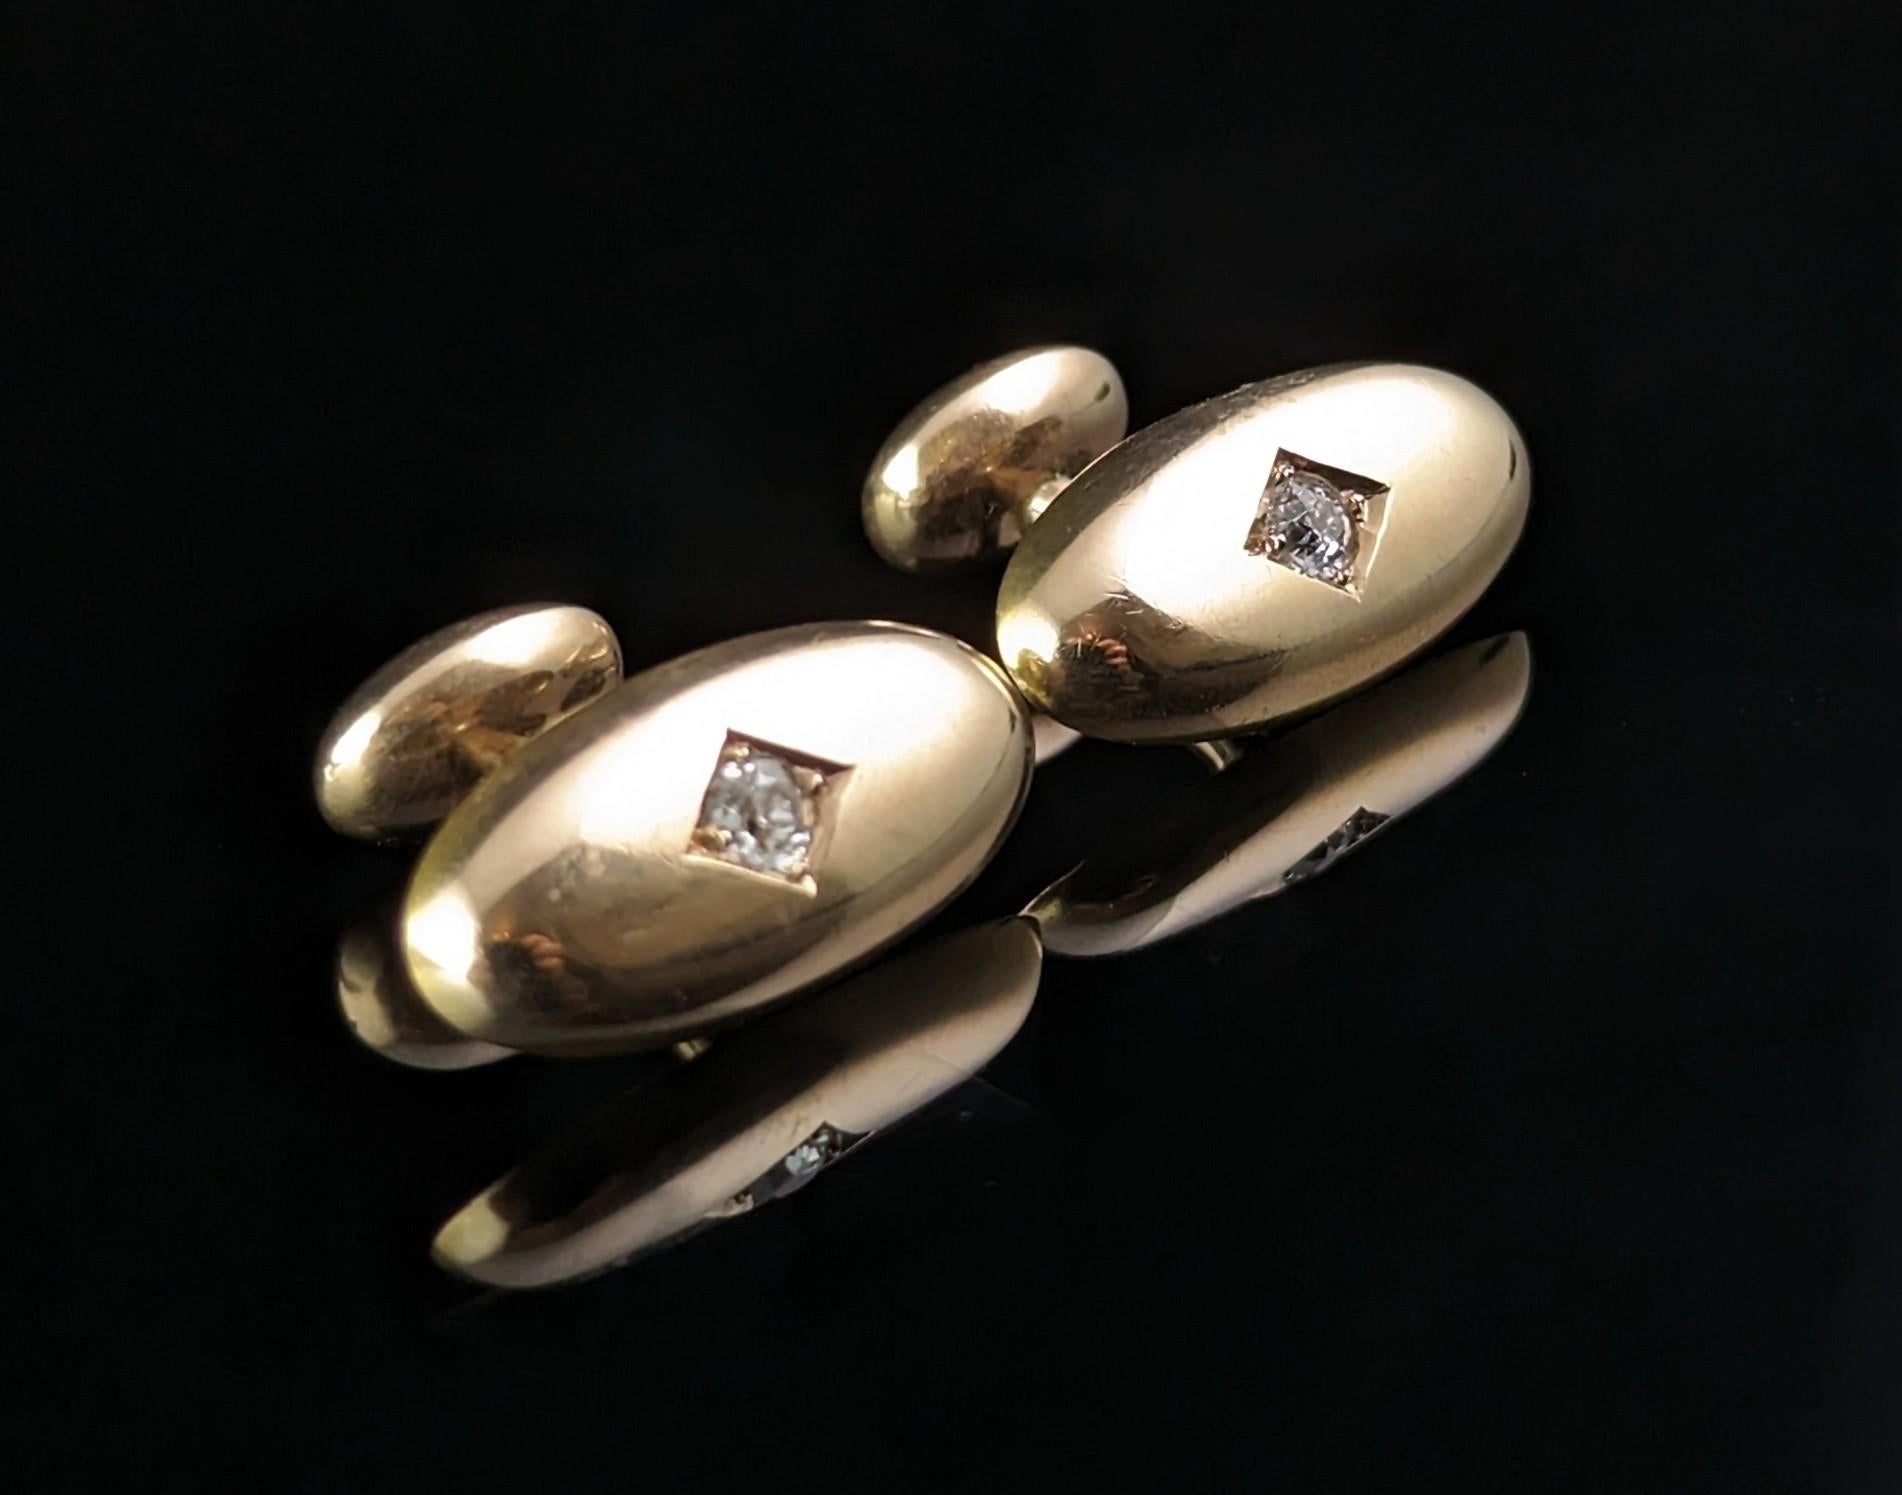 A gorgeous pair of Victorian diamond cufflinks.

These are such a beautifully crafted pair on rich 18ct gold with the warm and deep bloom only found on antique gold pieces.

Each cufflink is set with a single old cut diamond, approx 0.39ct Total,